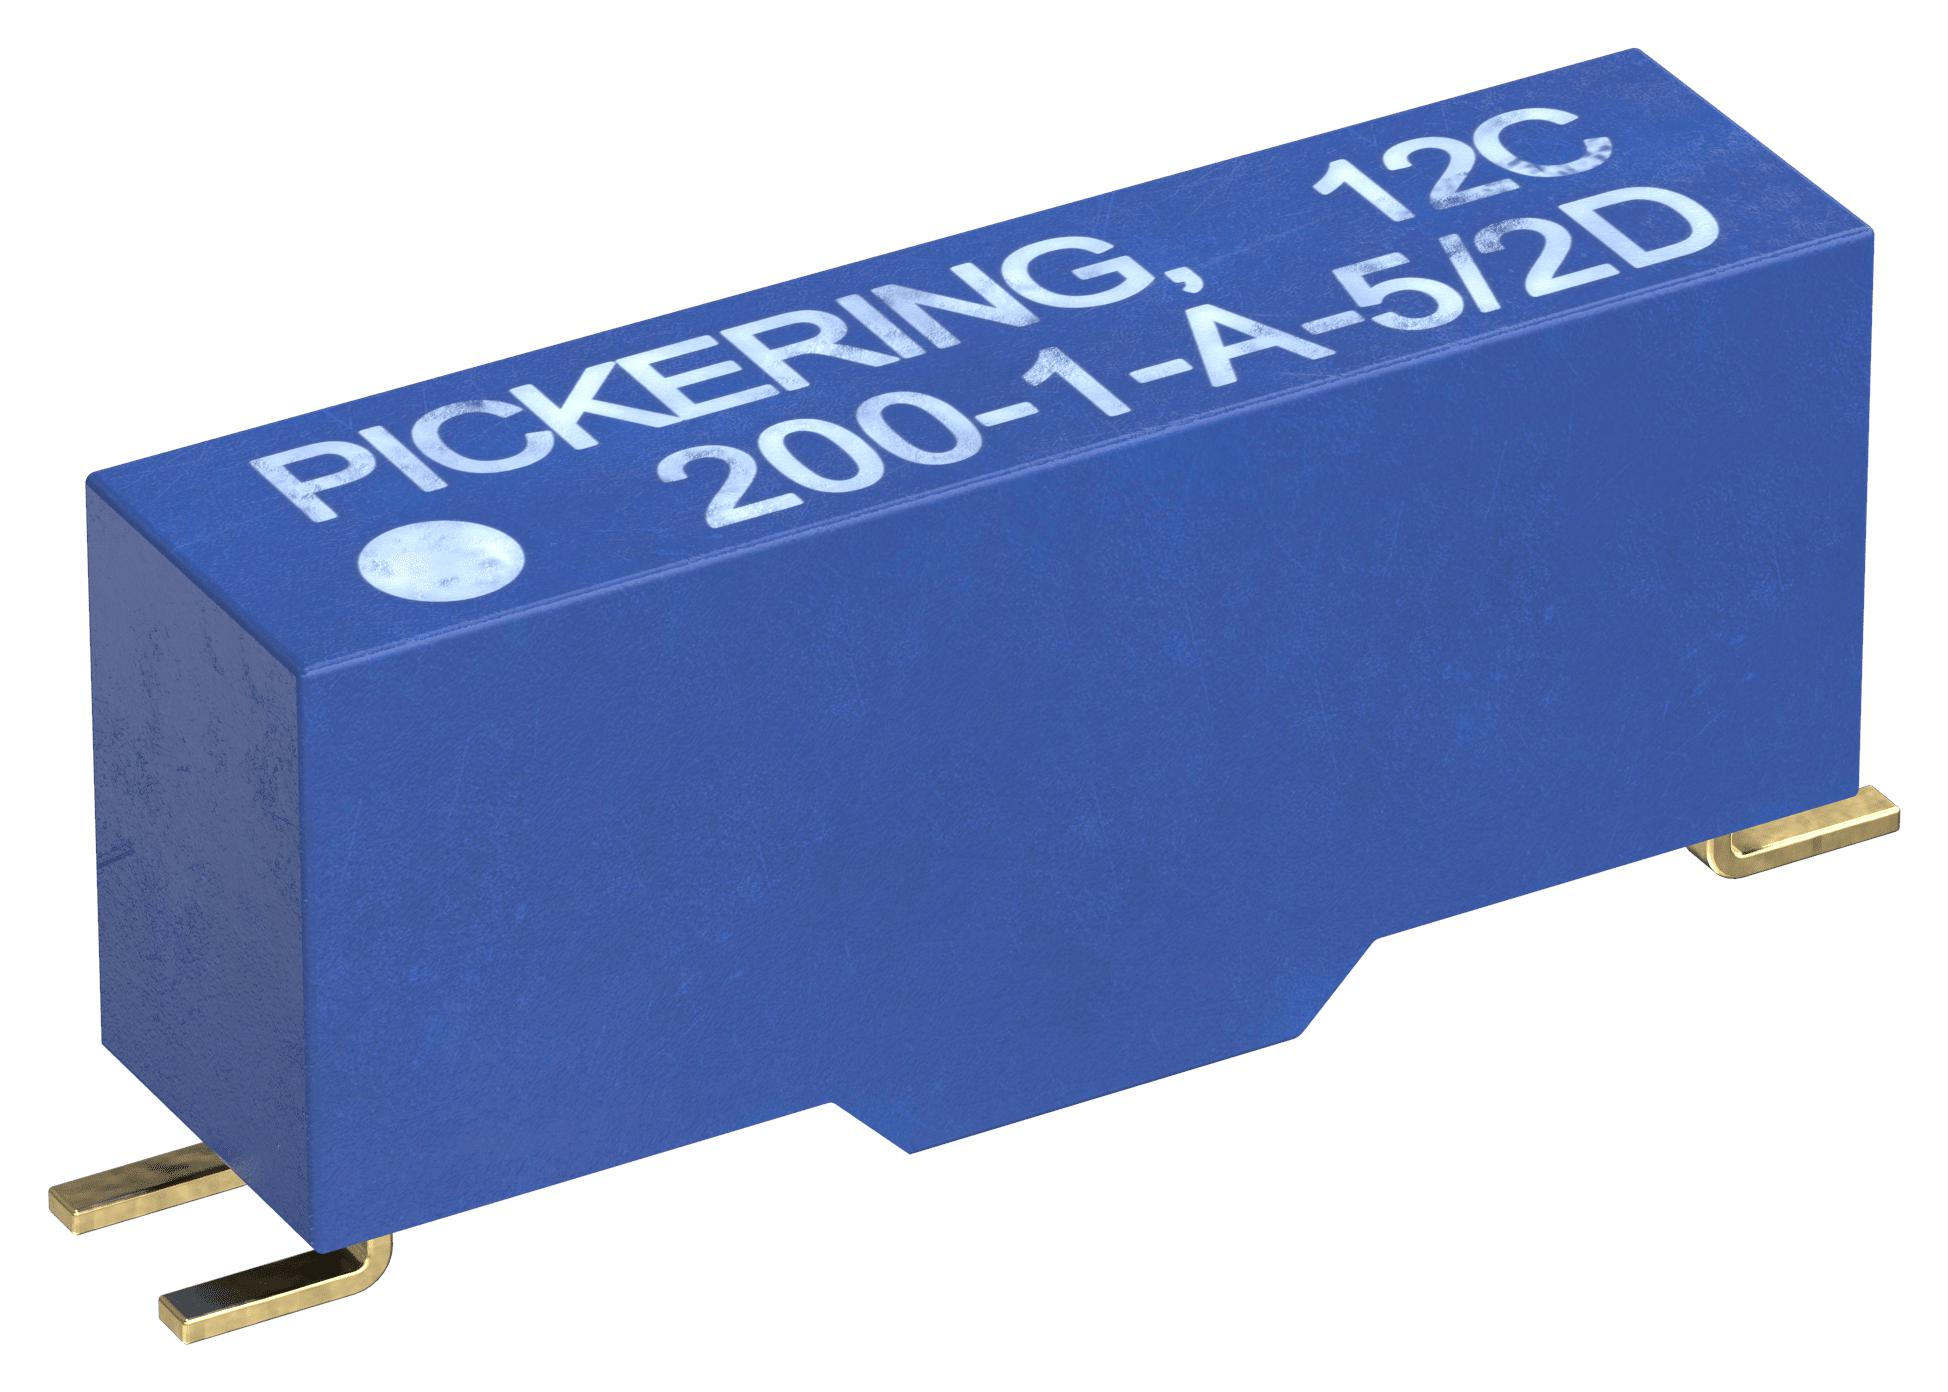 Pickering 200-1-A-5/2D Reed Relay, Spst-No, 5V, Smd